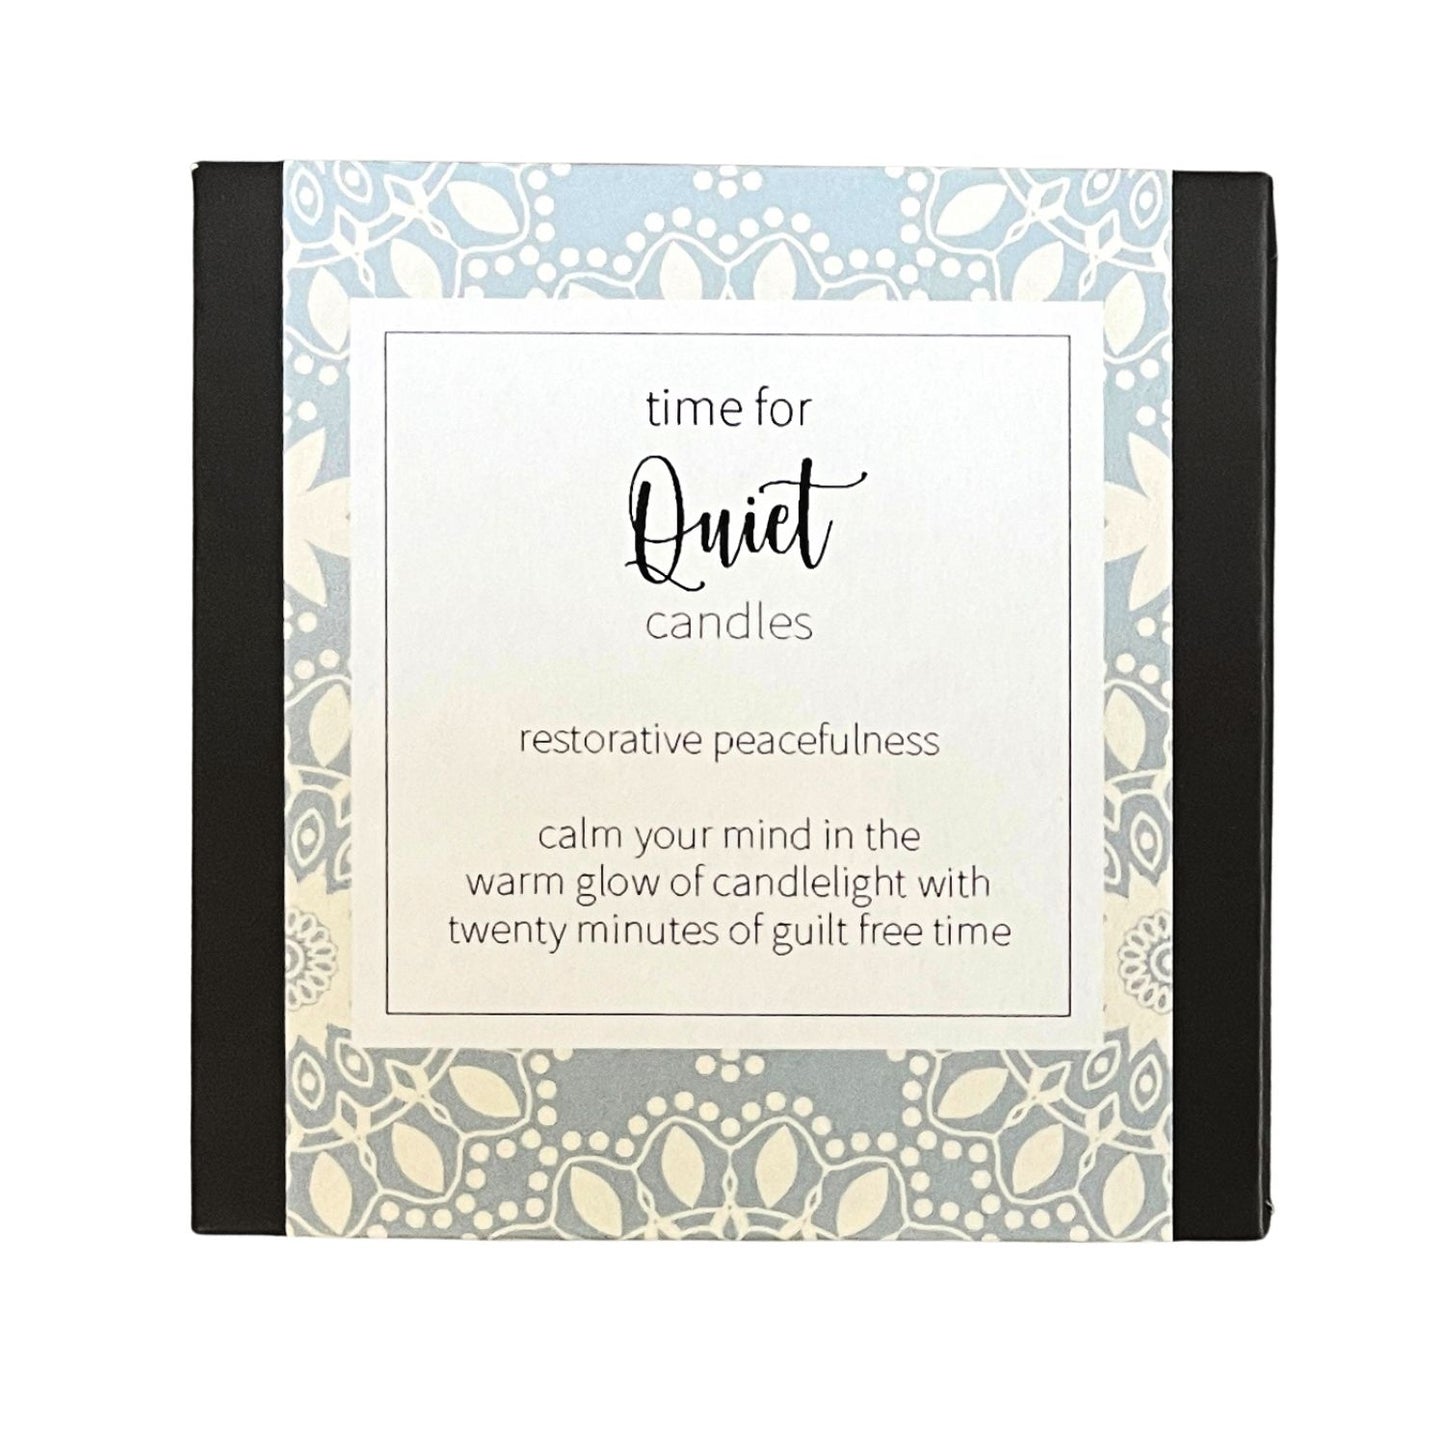 Cotton & Grey Time For Quiet Candles Calm Beeswax Candle Gift Idea